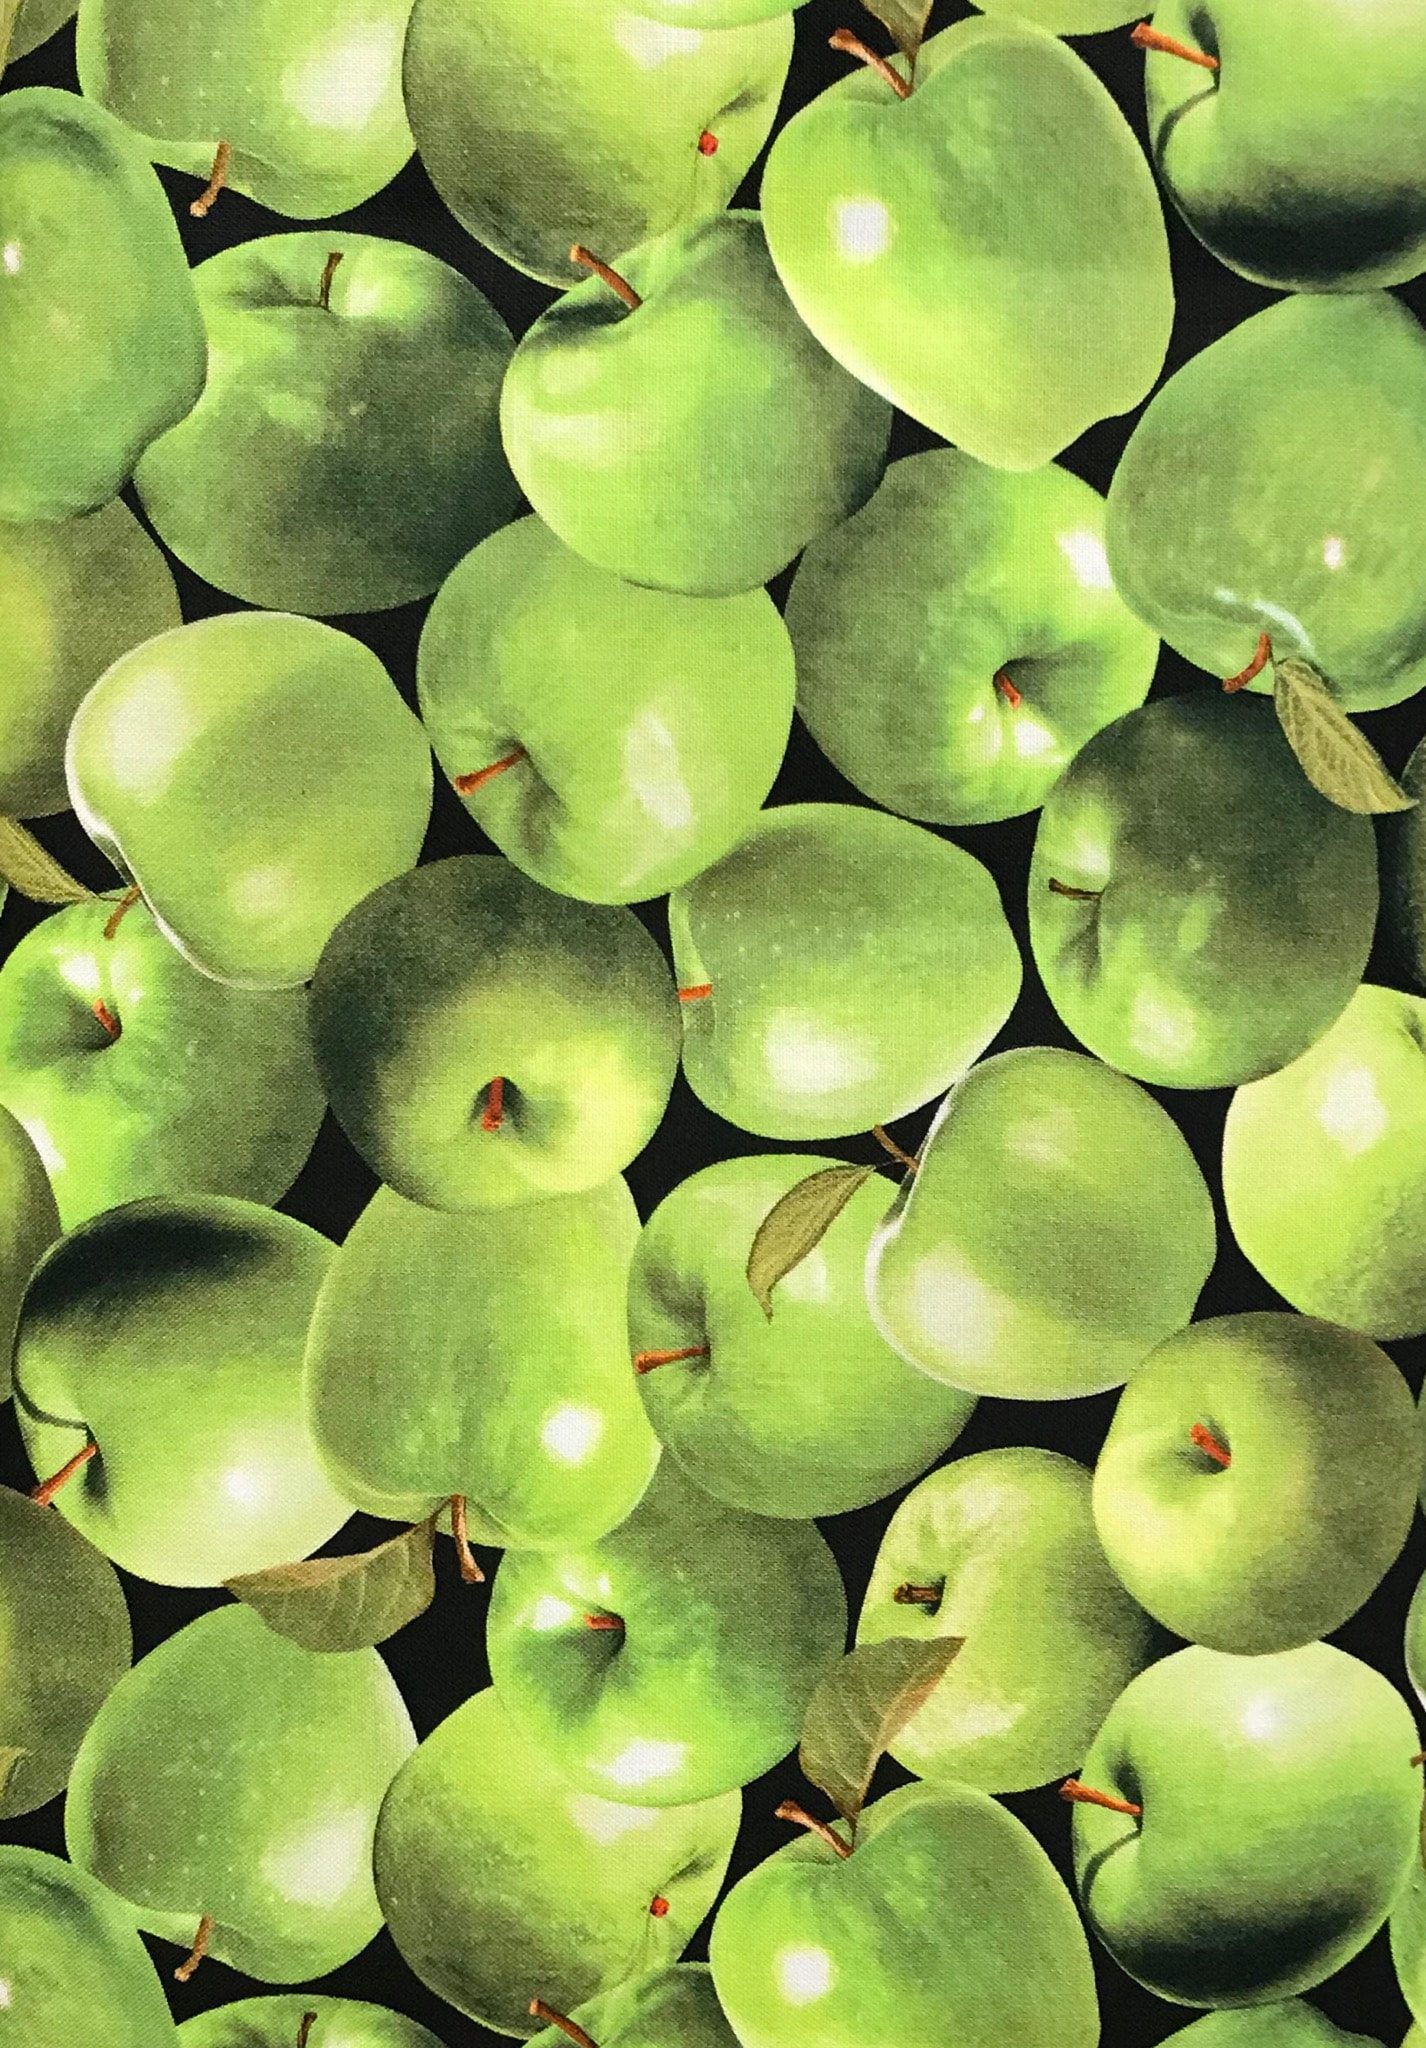 Packed Apples Green